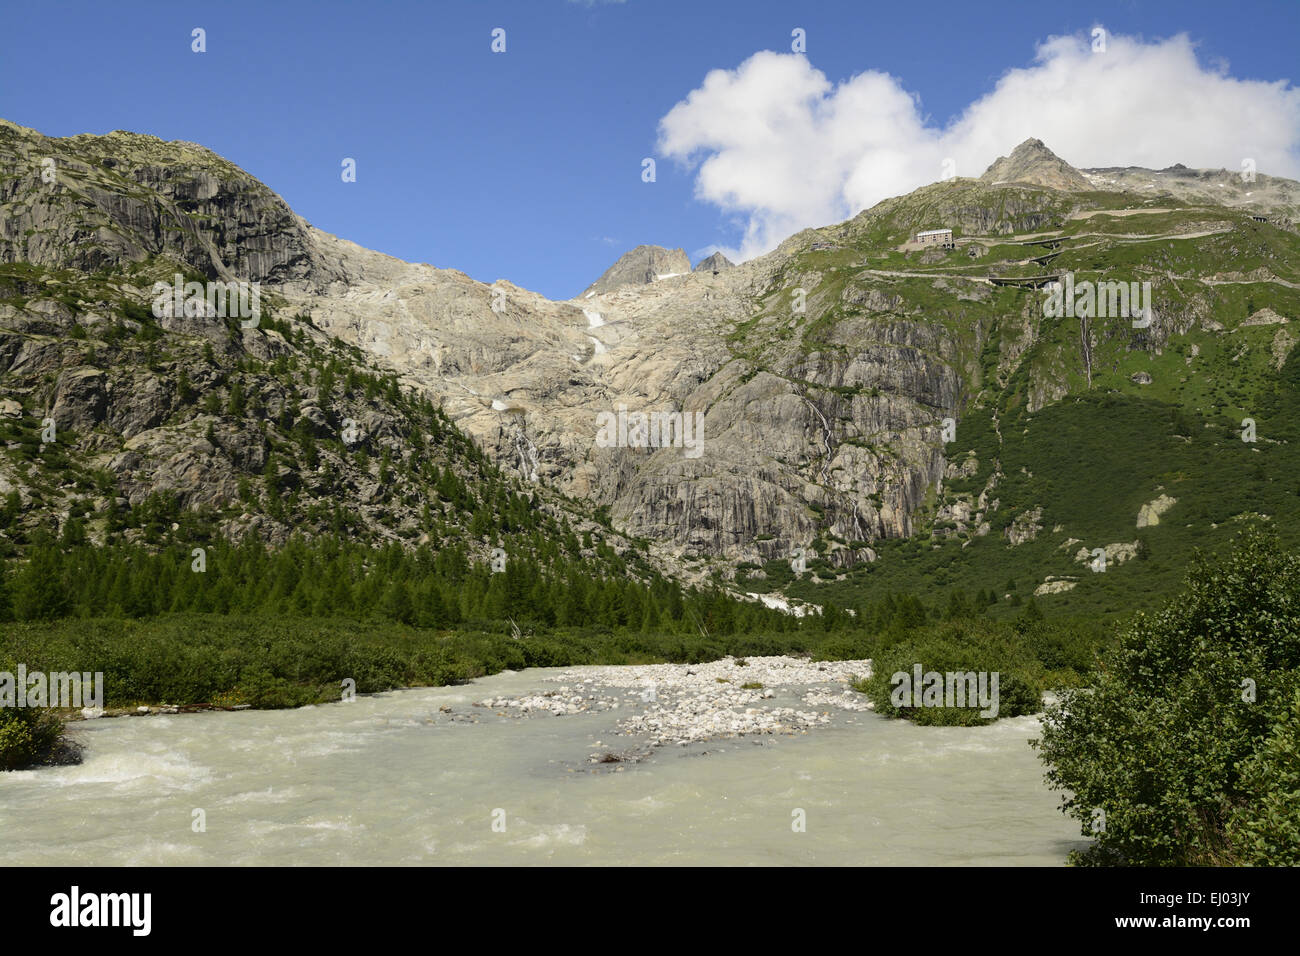 River, Rhone, Rotten, source of the Rhone, rock faces, Furka pass, Hotel, Belevedere, Gletsch, Goms, Alps, Canton, Valais, Switze Stock Photo